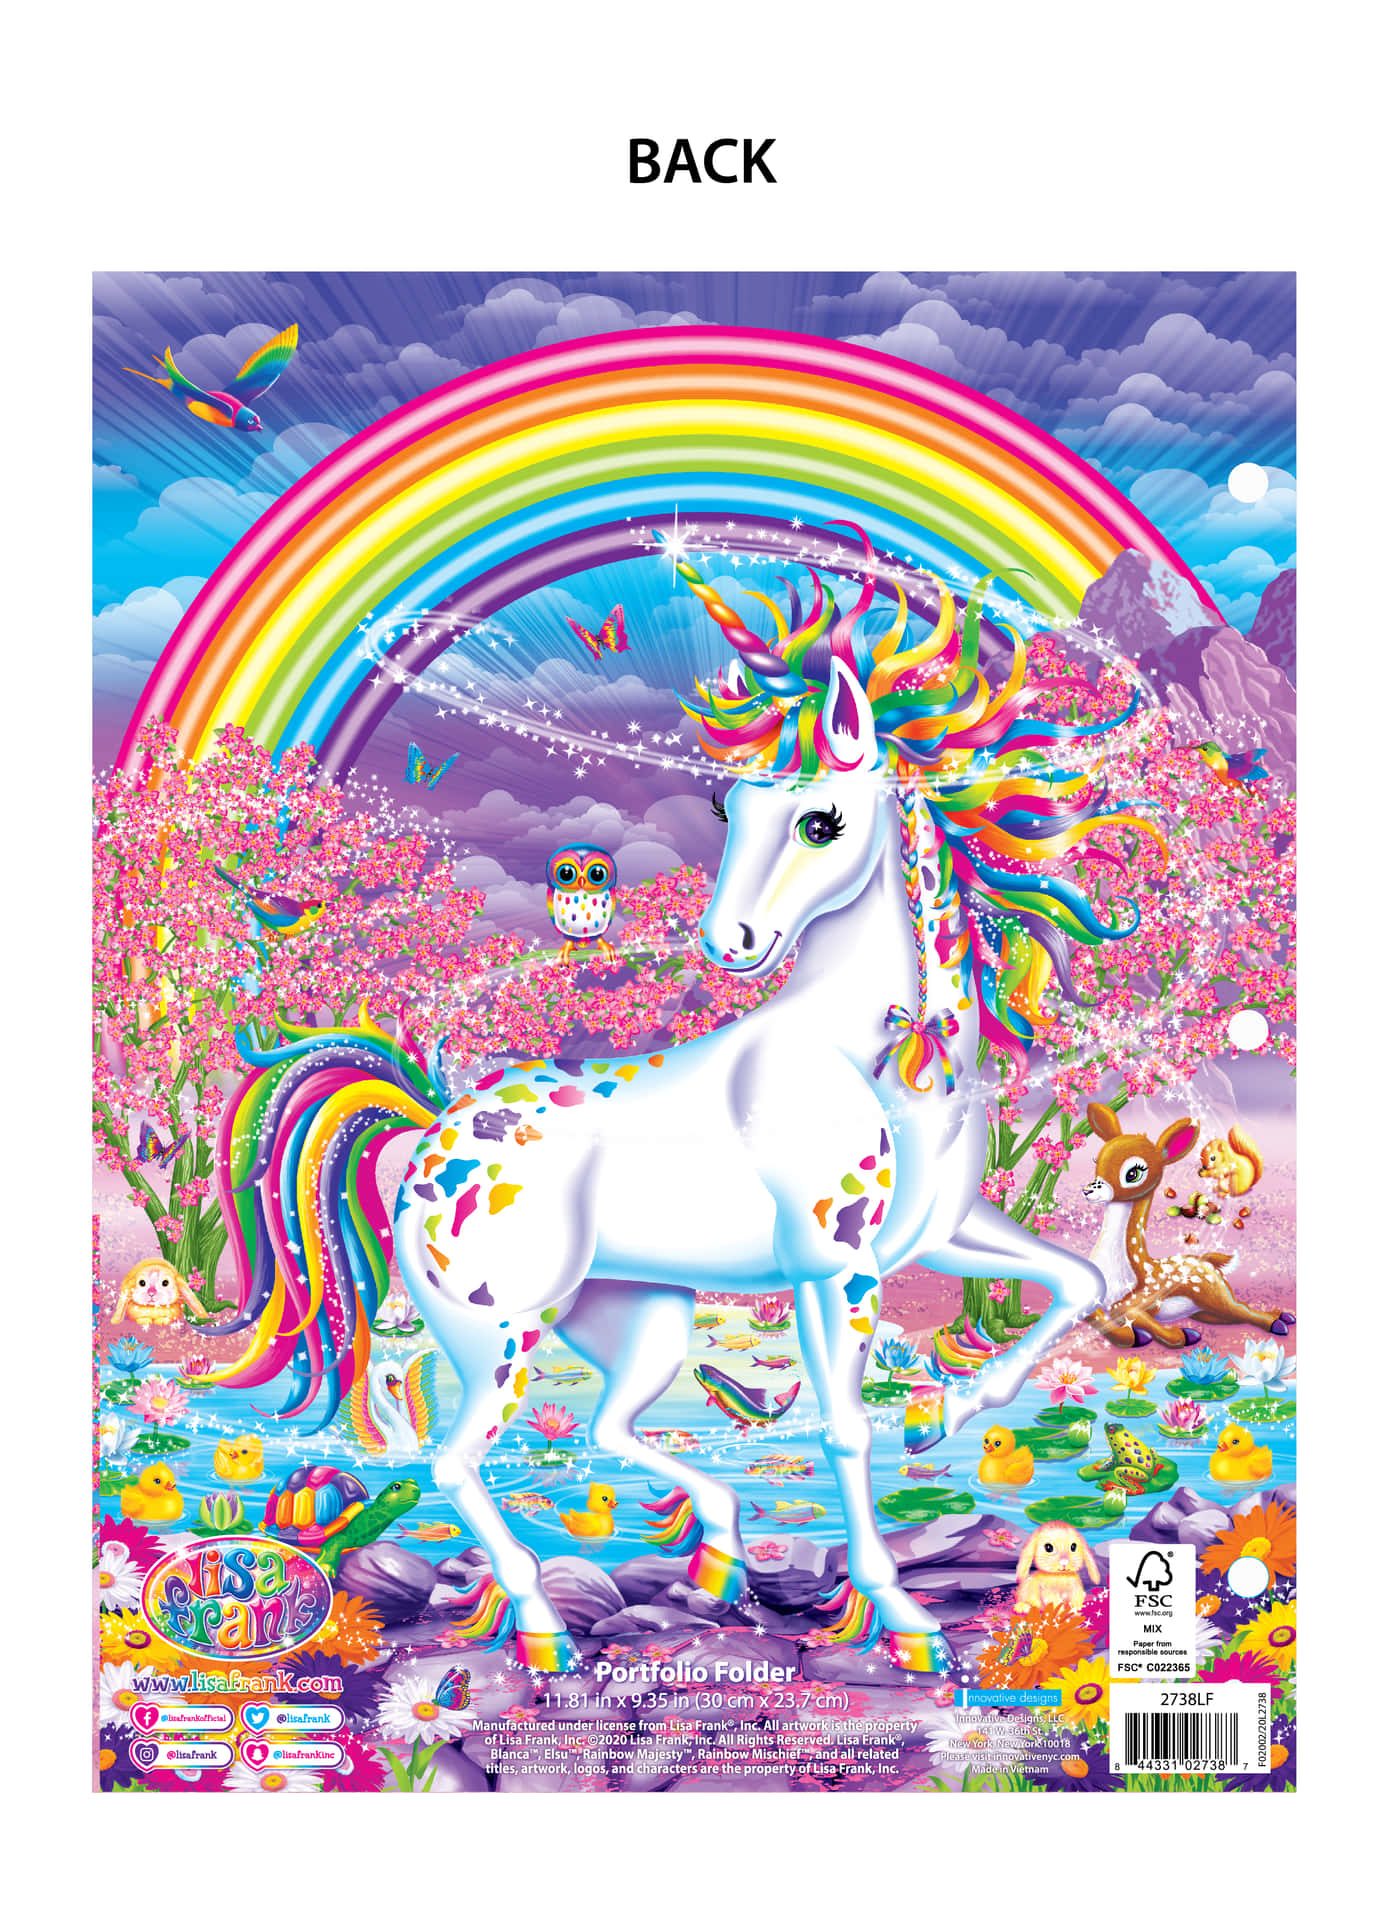 Lisa Frank Fabric Wallpaper and Home Decor  Spoonflower